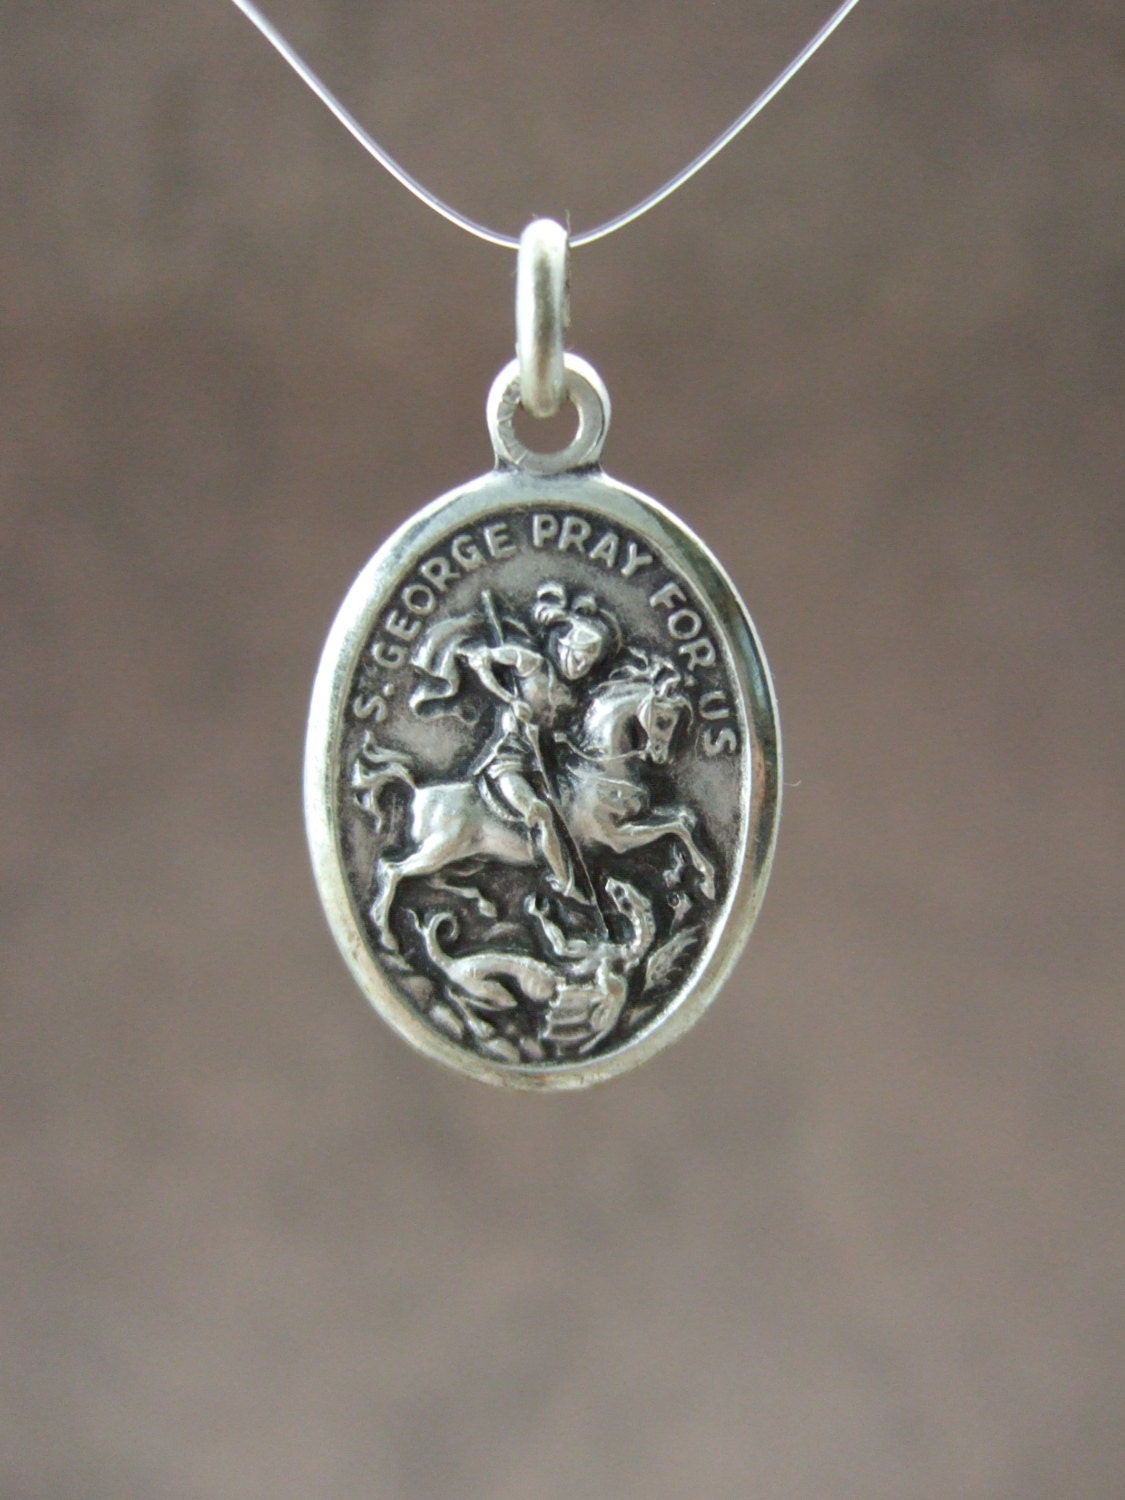 Vintage ST. GEORGE and the Dragon medal 26mm silver finish